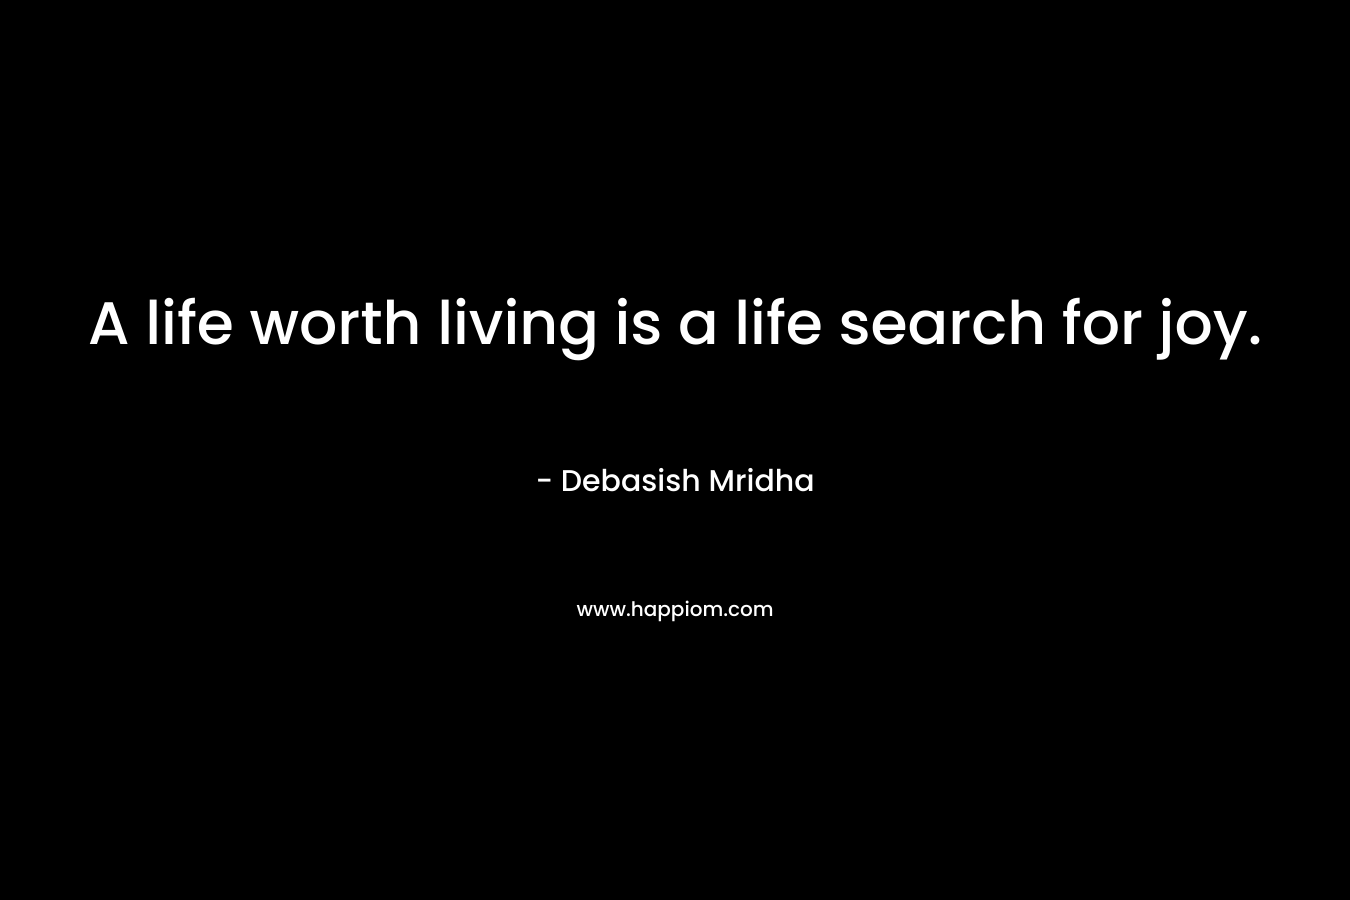 A life worth living is a life search for joy.